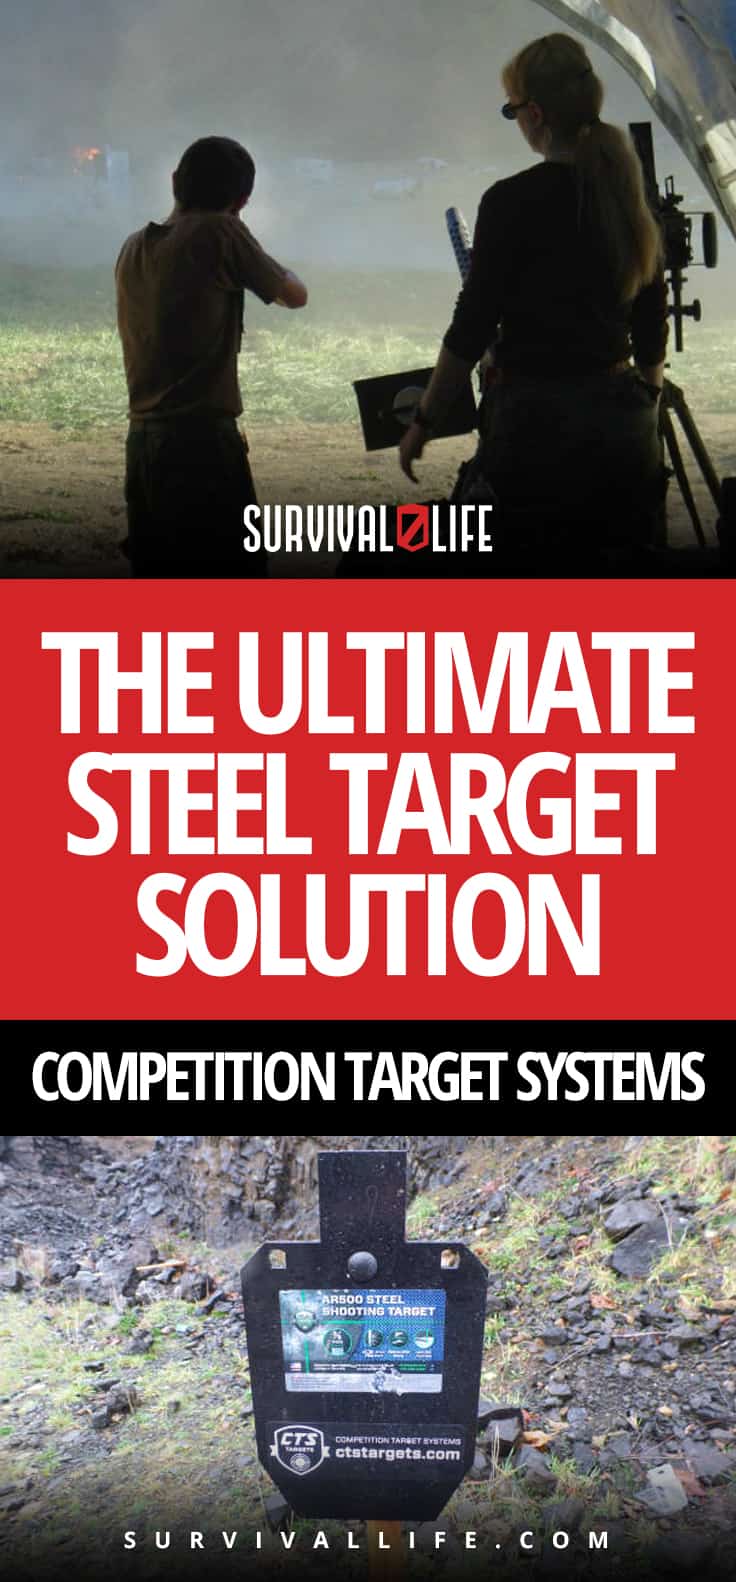 Bullseye! The Ultimate Steel Target Solution | Competition Target Systems